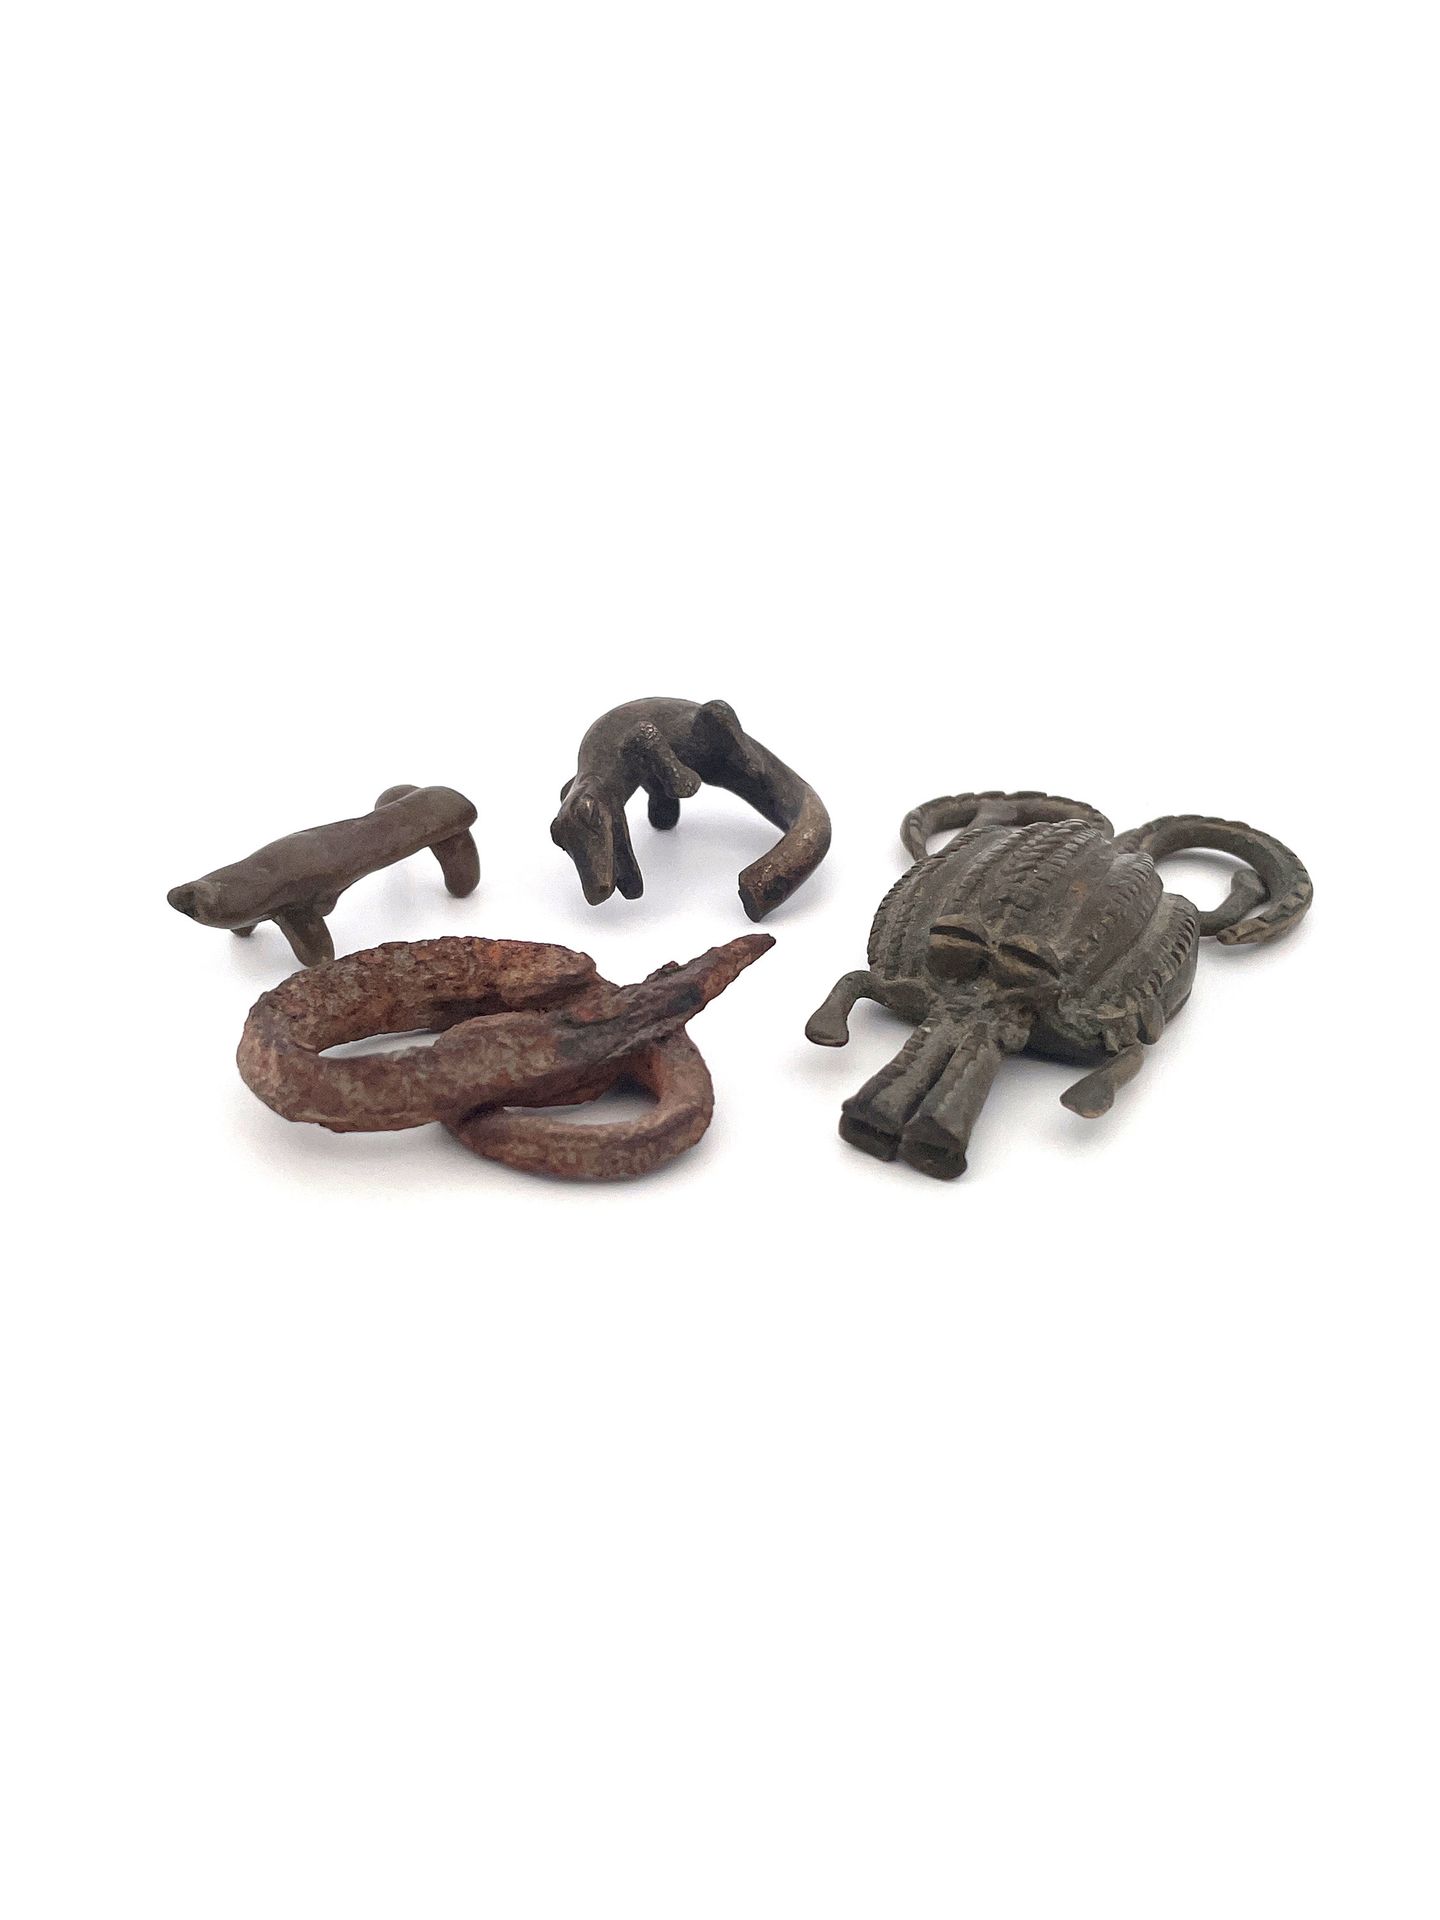 3 Miiature Bronzes and an Iron Snake 3 small bronzes and 1 iron snake

Ghana

Oh&hellip;